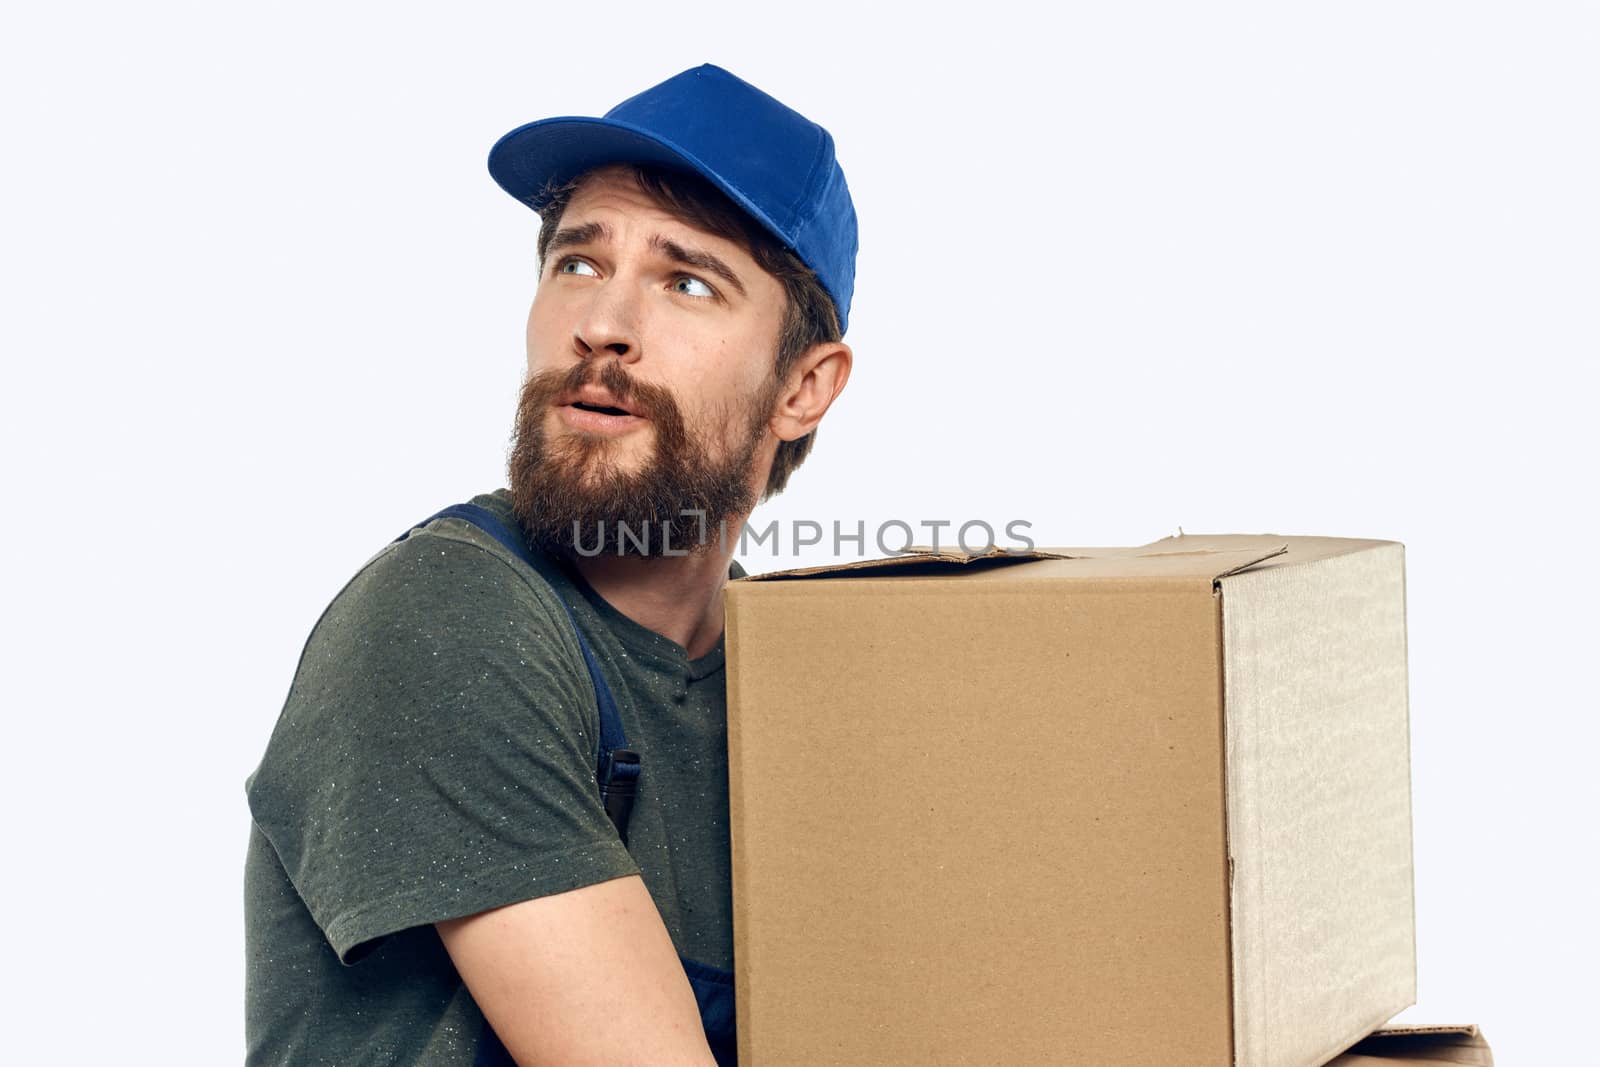 Working man with boxes in hands delivery service work lifestyle. High quality photo